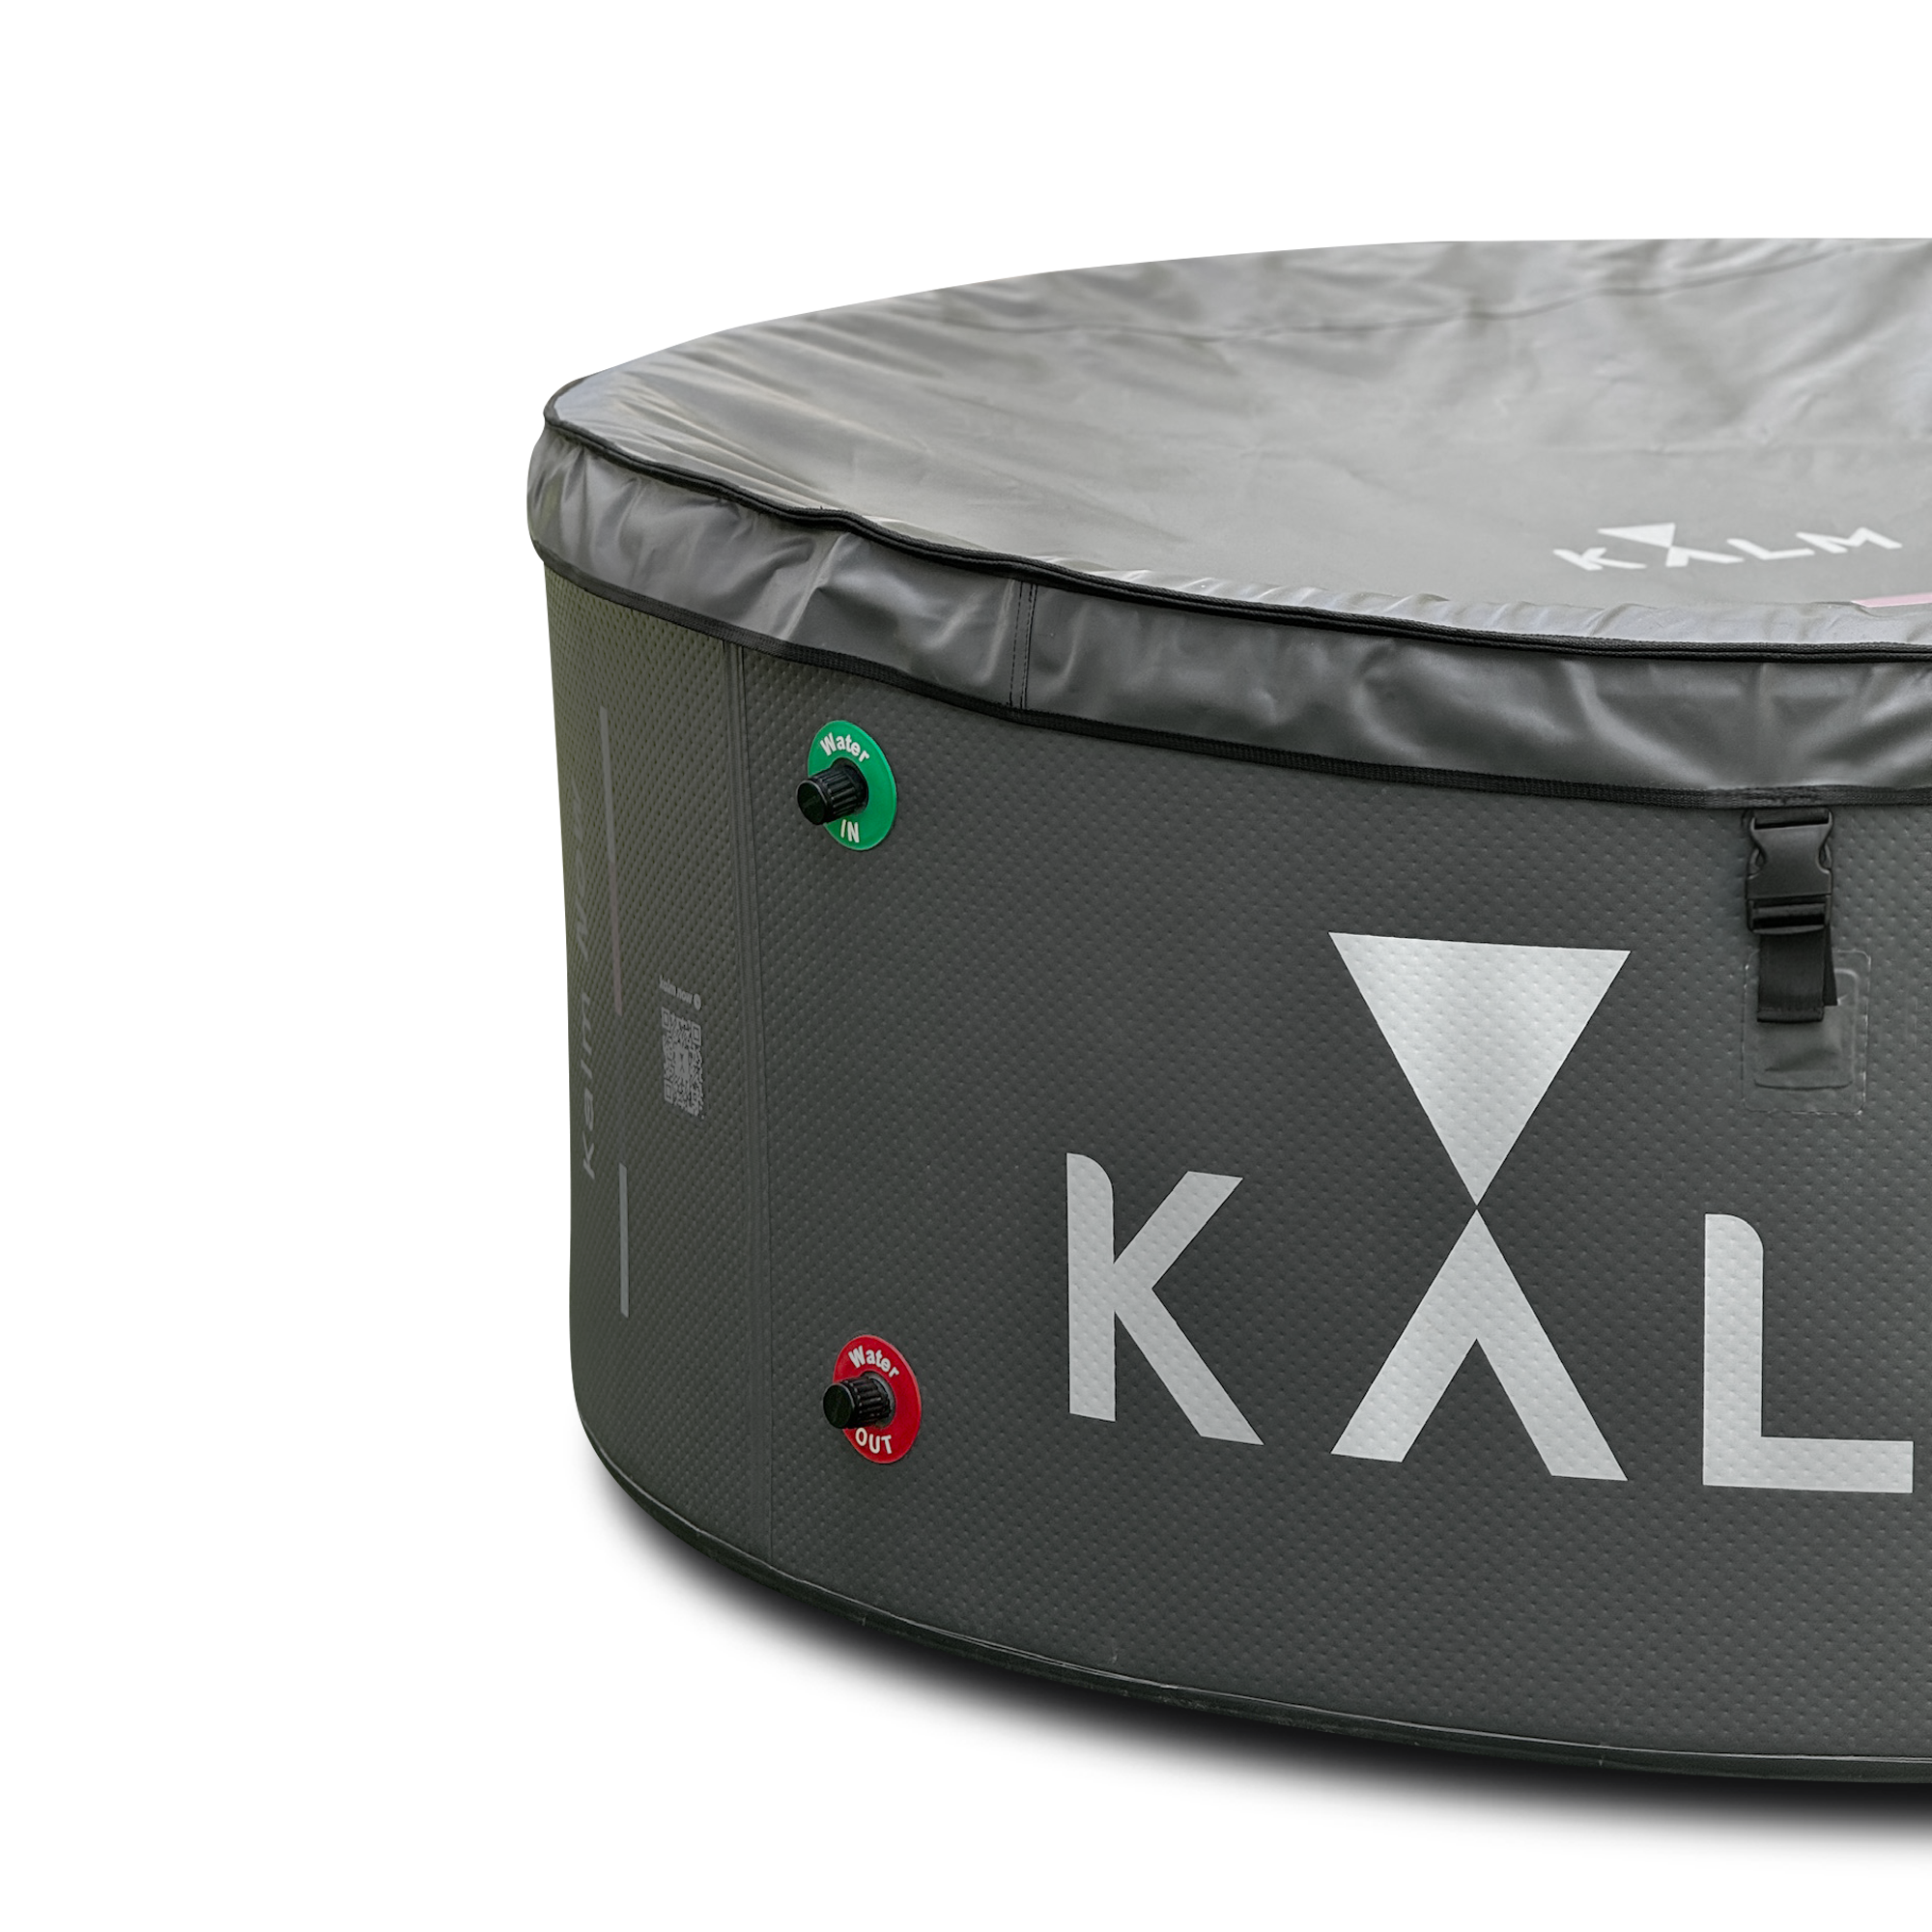 Kalm NordicNest Group Tub for Cold Plunge and Ice Baths